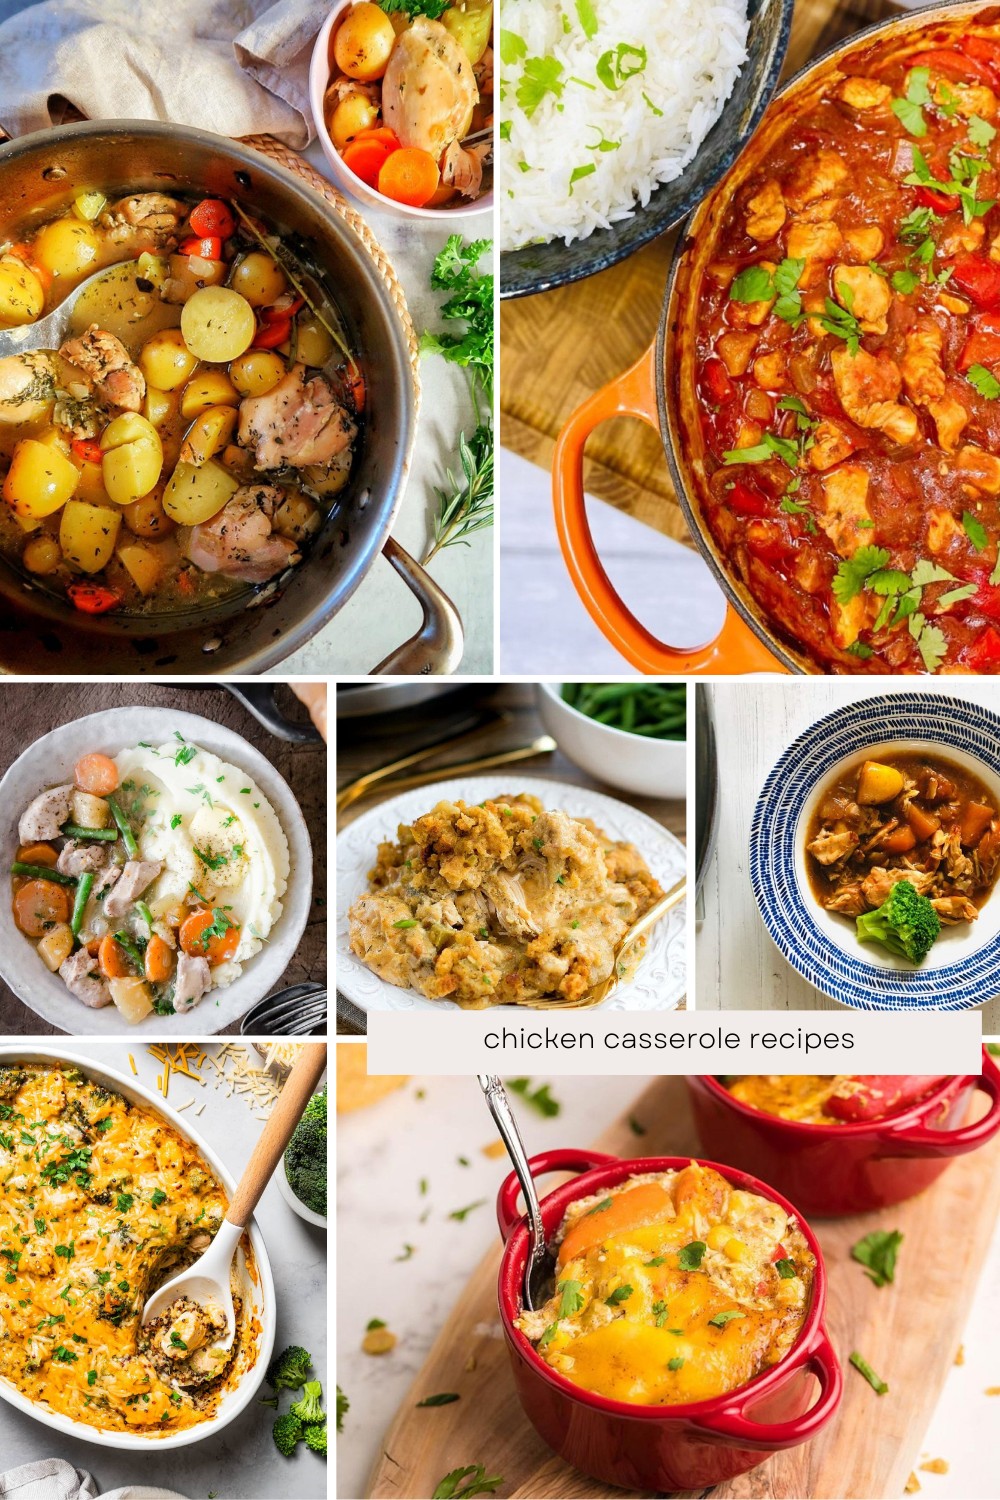 Craving a comforting chicken casserole? We've got a collection of the best recipes for you! Perfect for both seasoned cooks and kitchen newbies, these mouthwatering dishes are sure to impress. Dive into our easy-to-follow, delicious chicken casserole recipes today! #ChickenCasserole #ComfortFood #EasyRecipes







